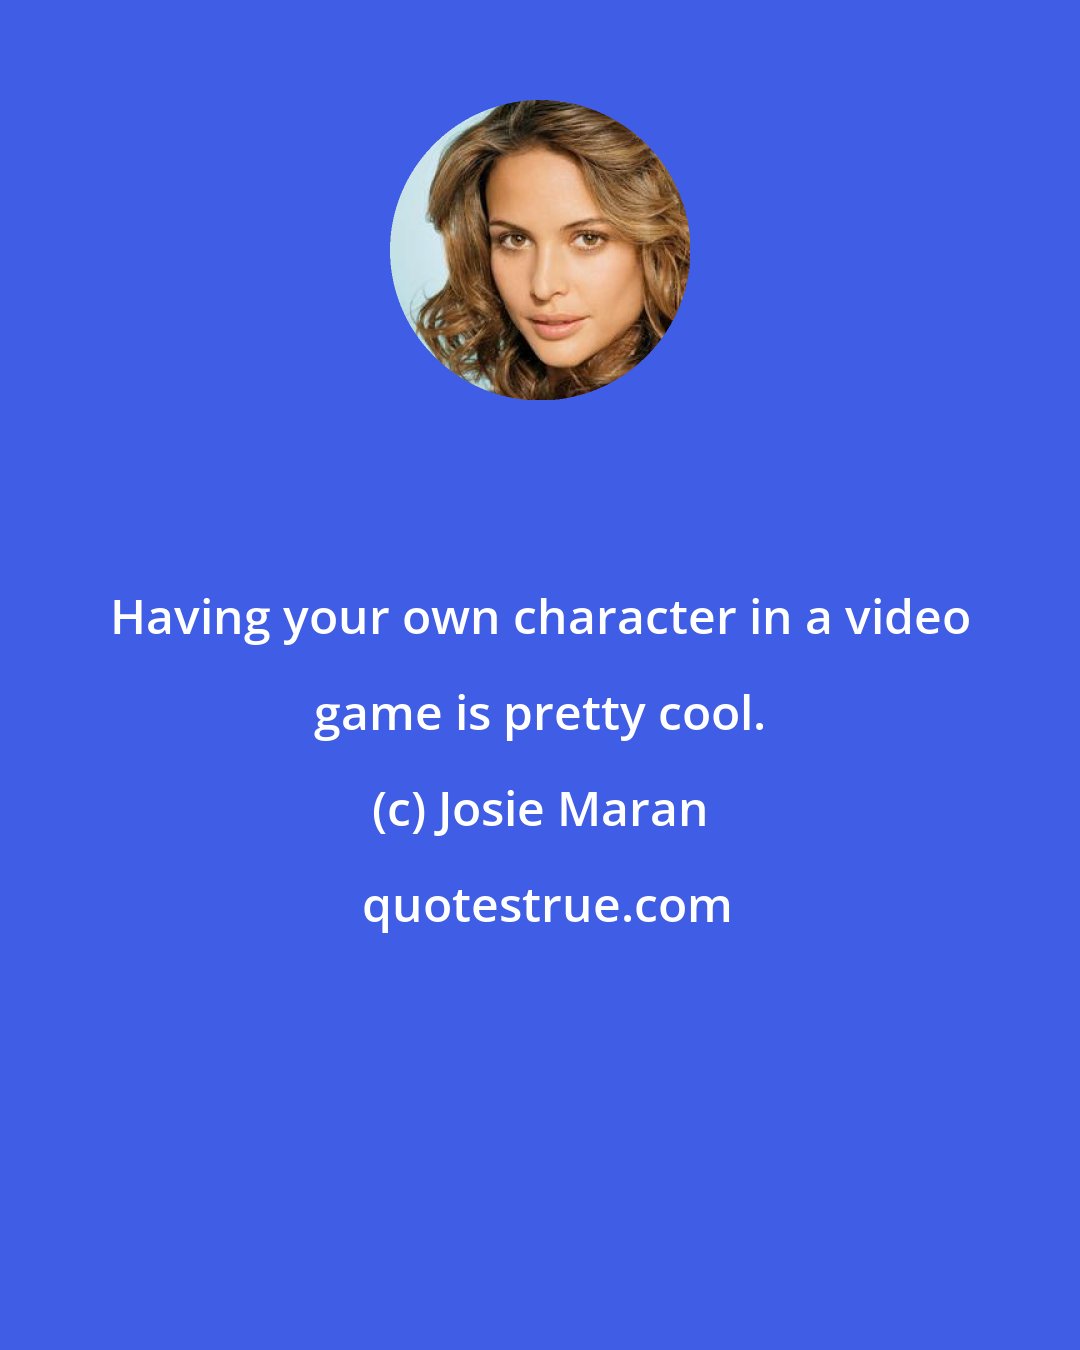 Josie Maran: Having your own character in a video game is pretty cool.